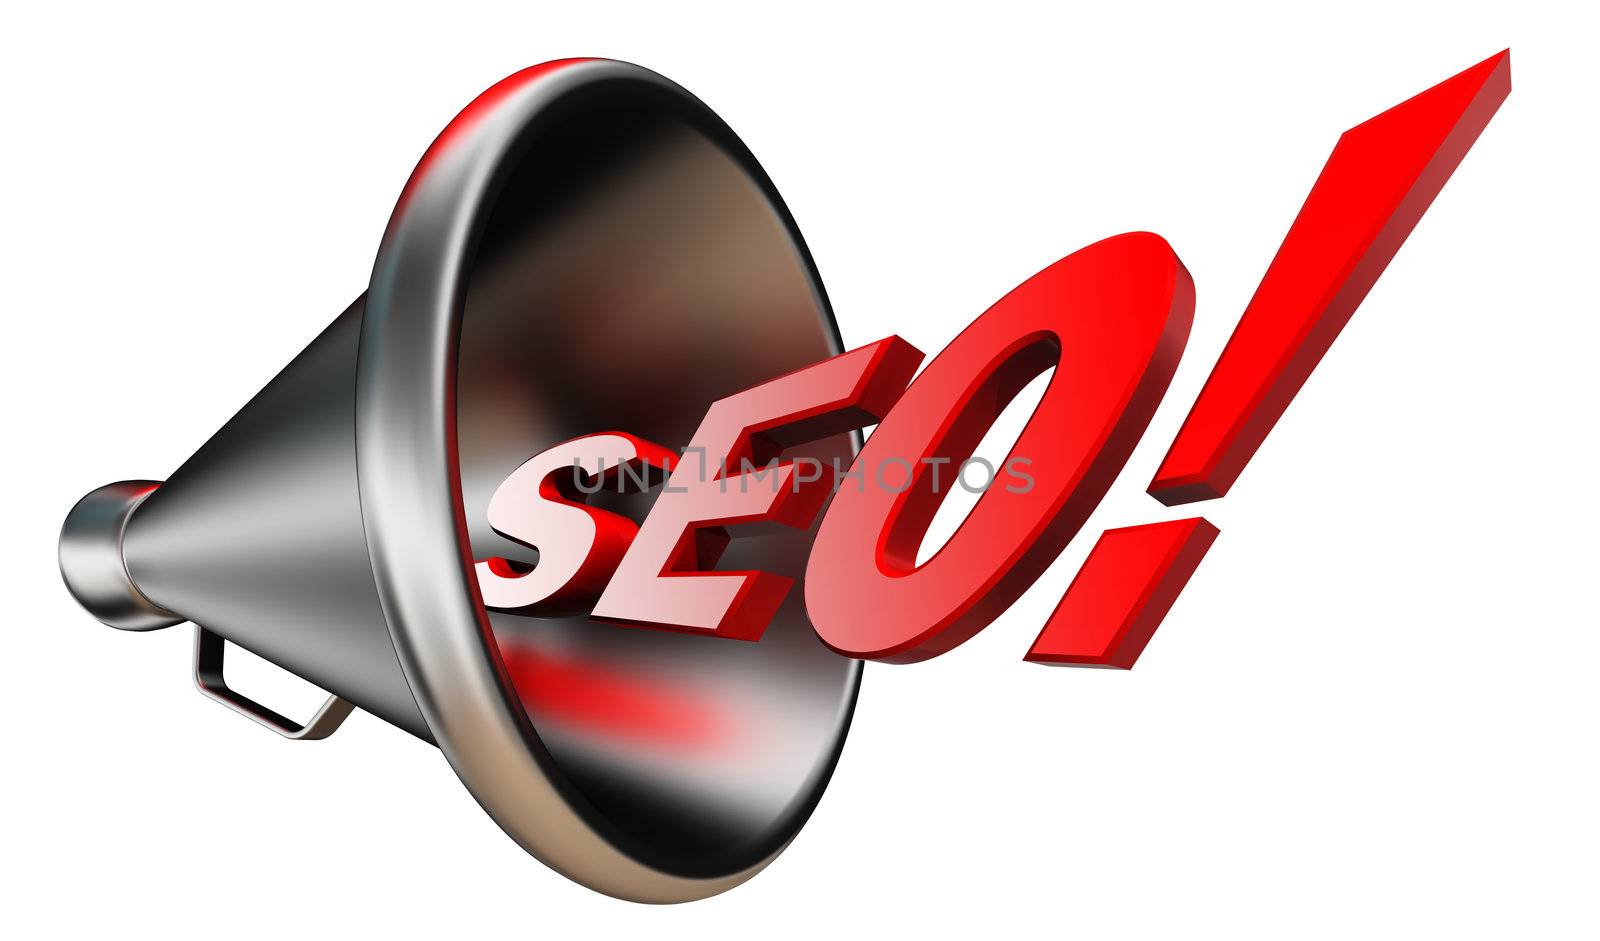 seo red wonrd and conceptual bullhorn on white background. clipping path included